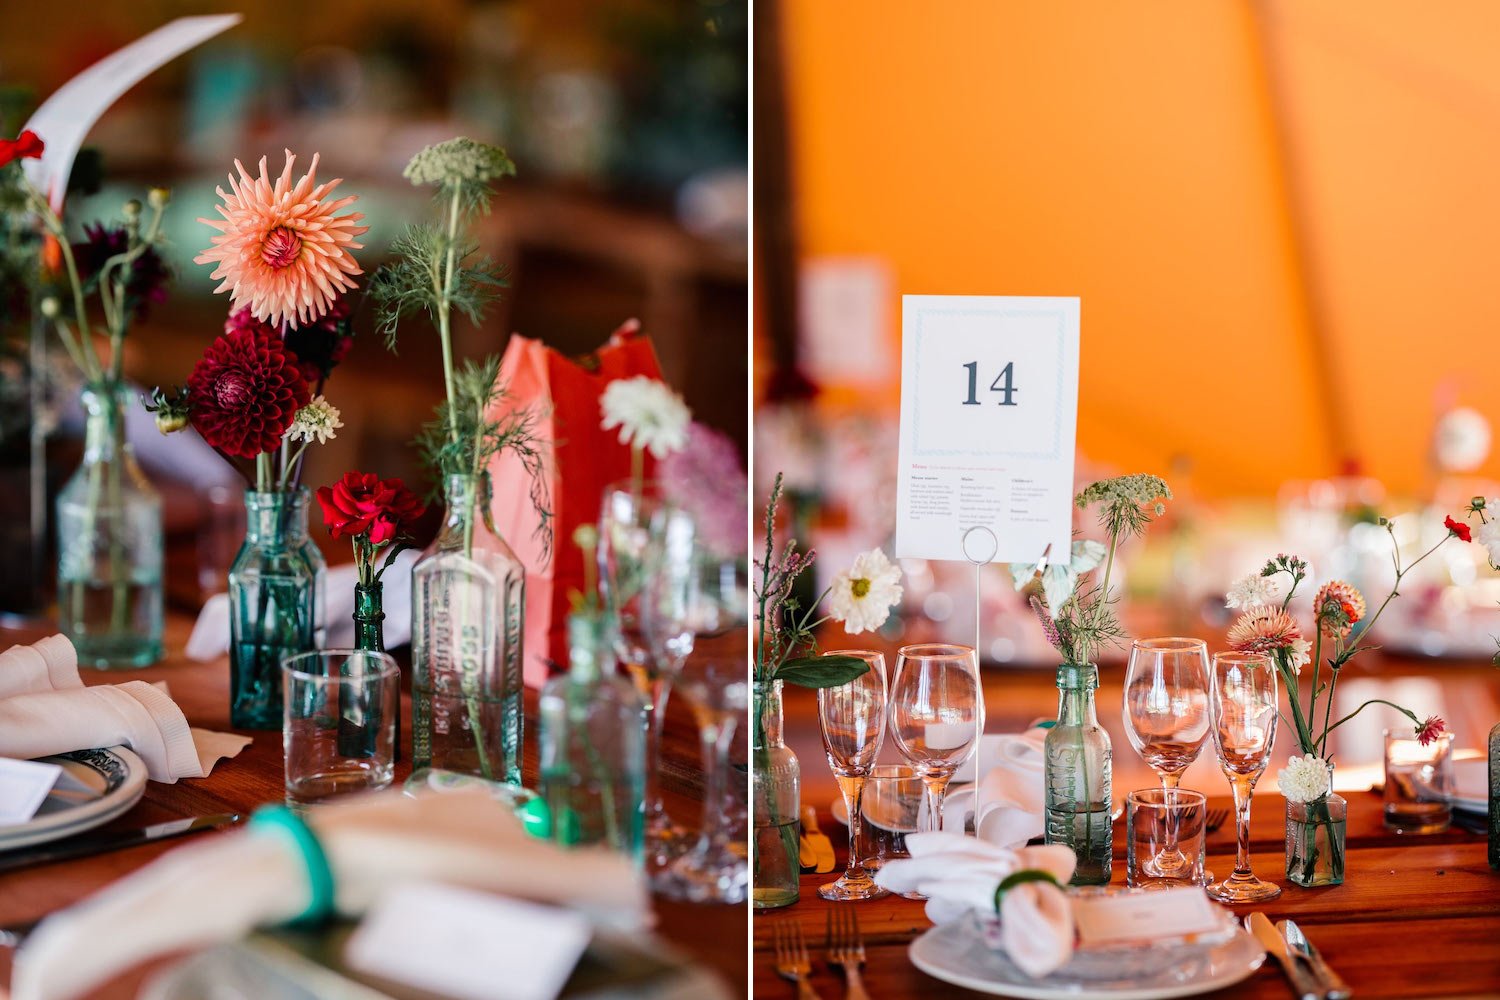 Wedding tables with bud vases